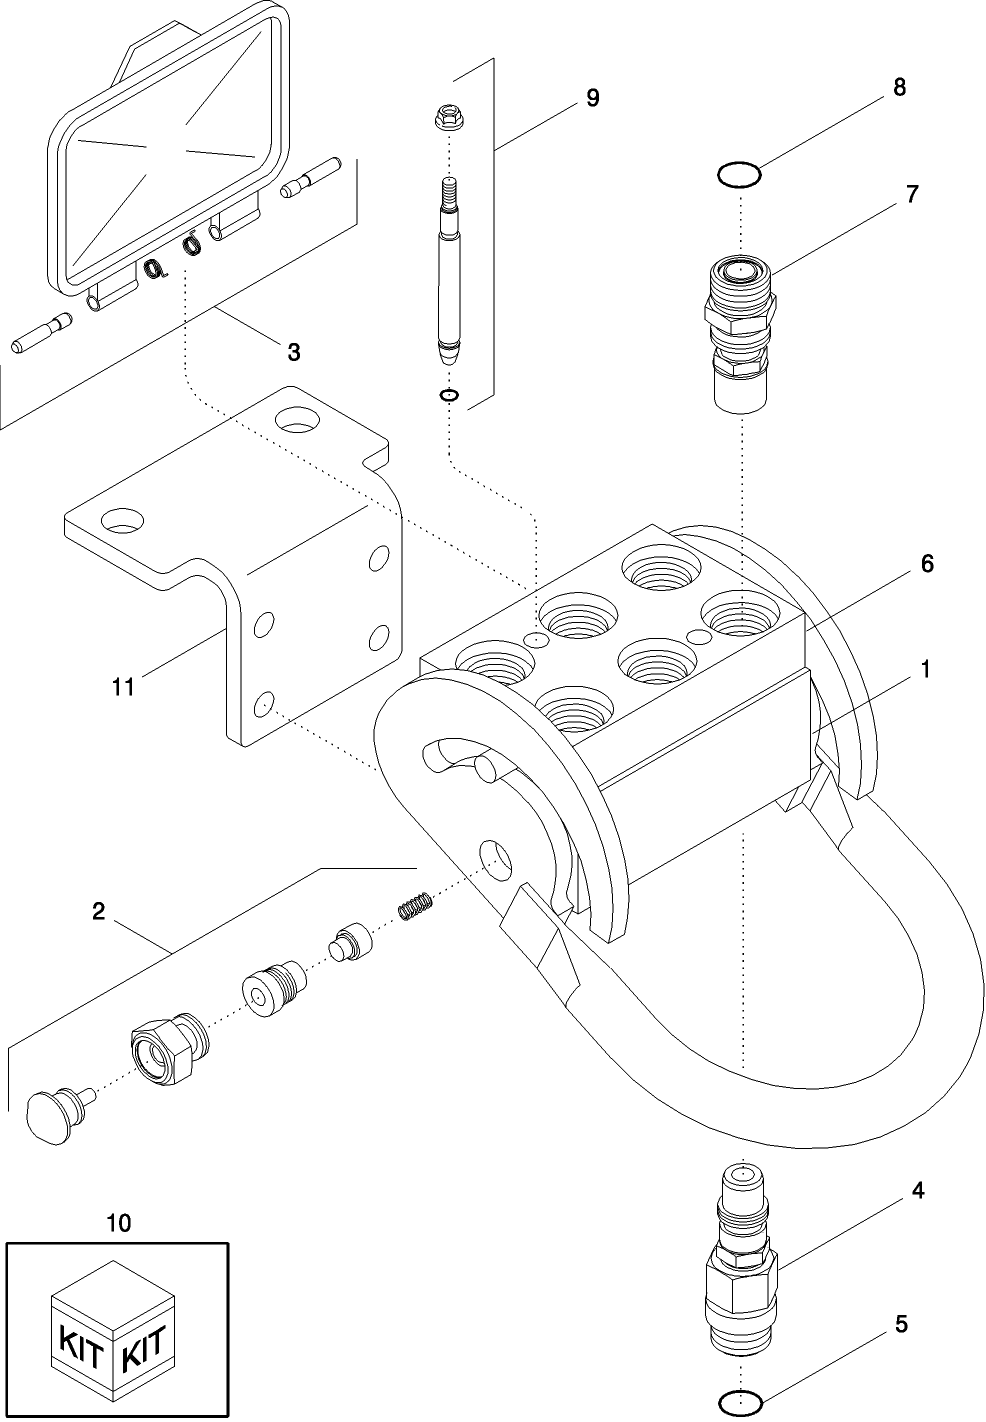 08 -09 COUPLER - ONE LEVER QUICK CONNECT